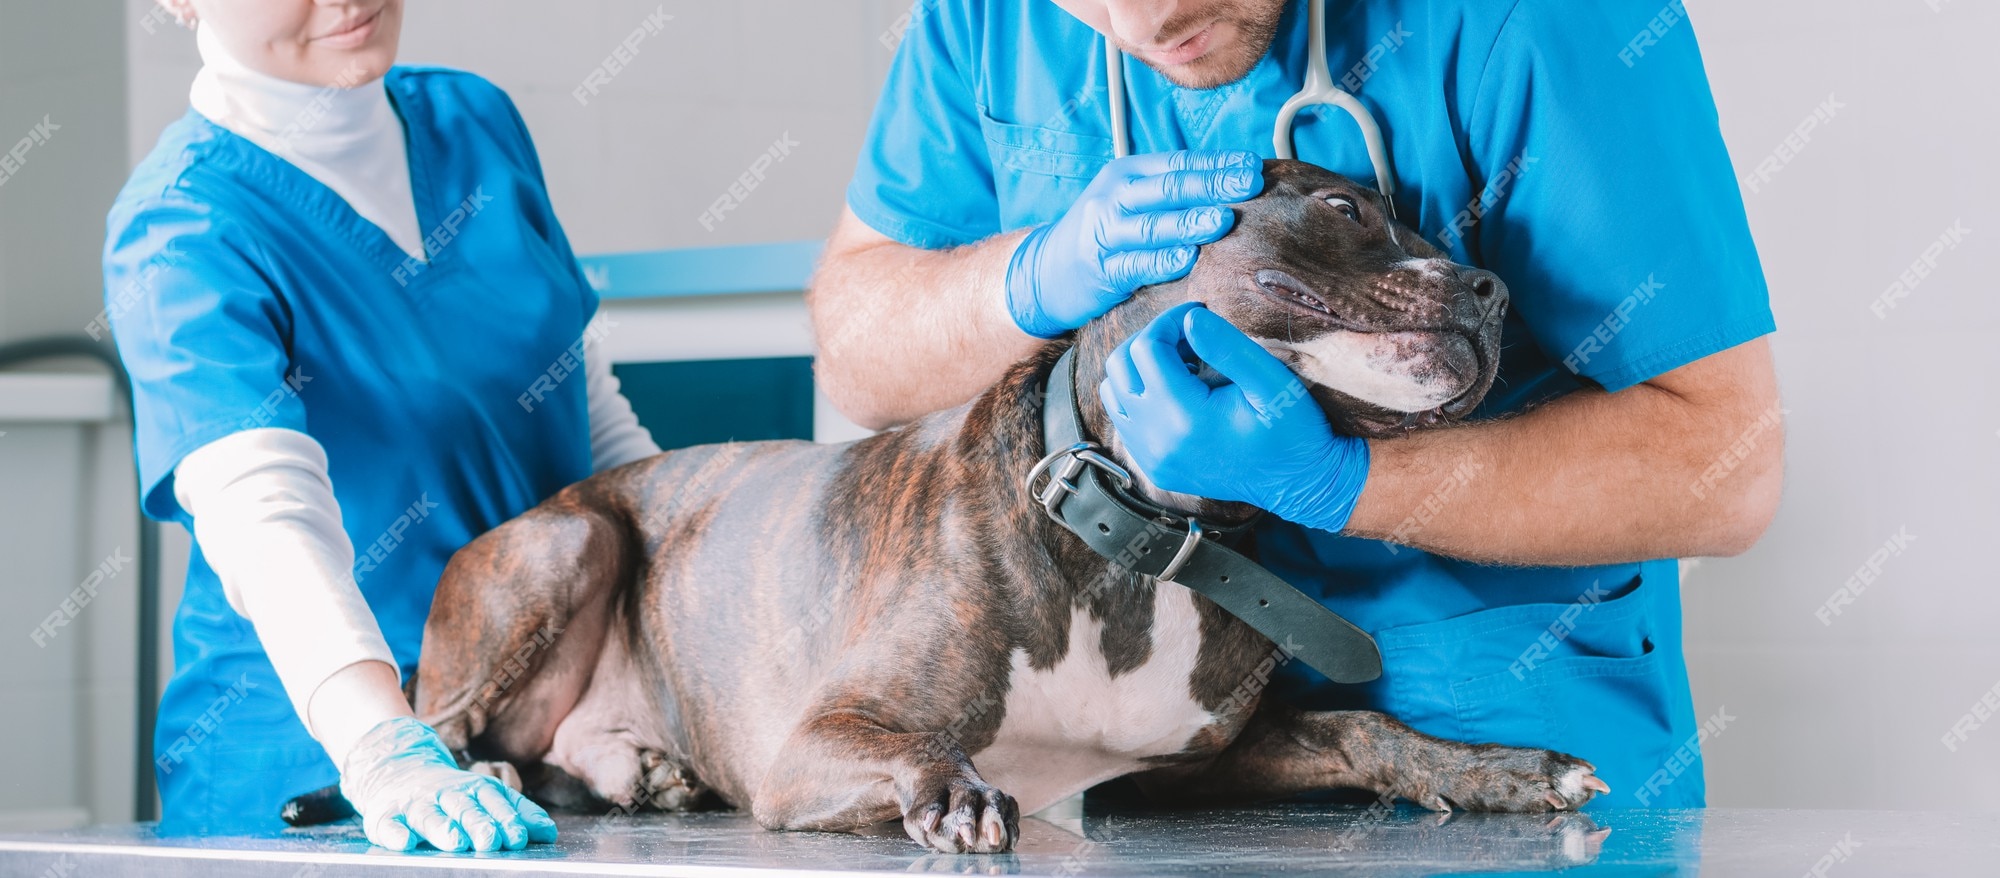 Premium Photo | Picture of a bulldog at a vet appointment. male therapist  and female nurse. the dog lies on the examination table. veterinary  medicine concept. mixed media